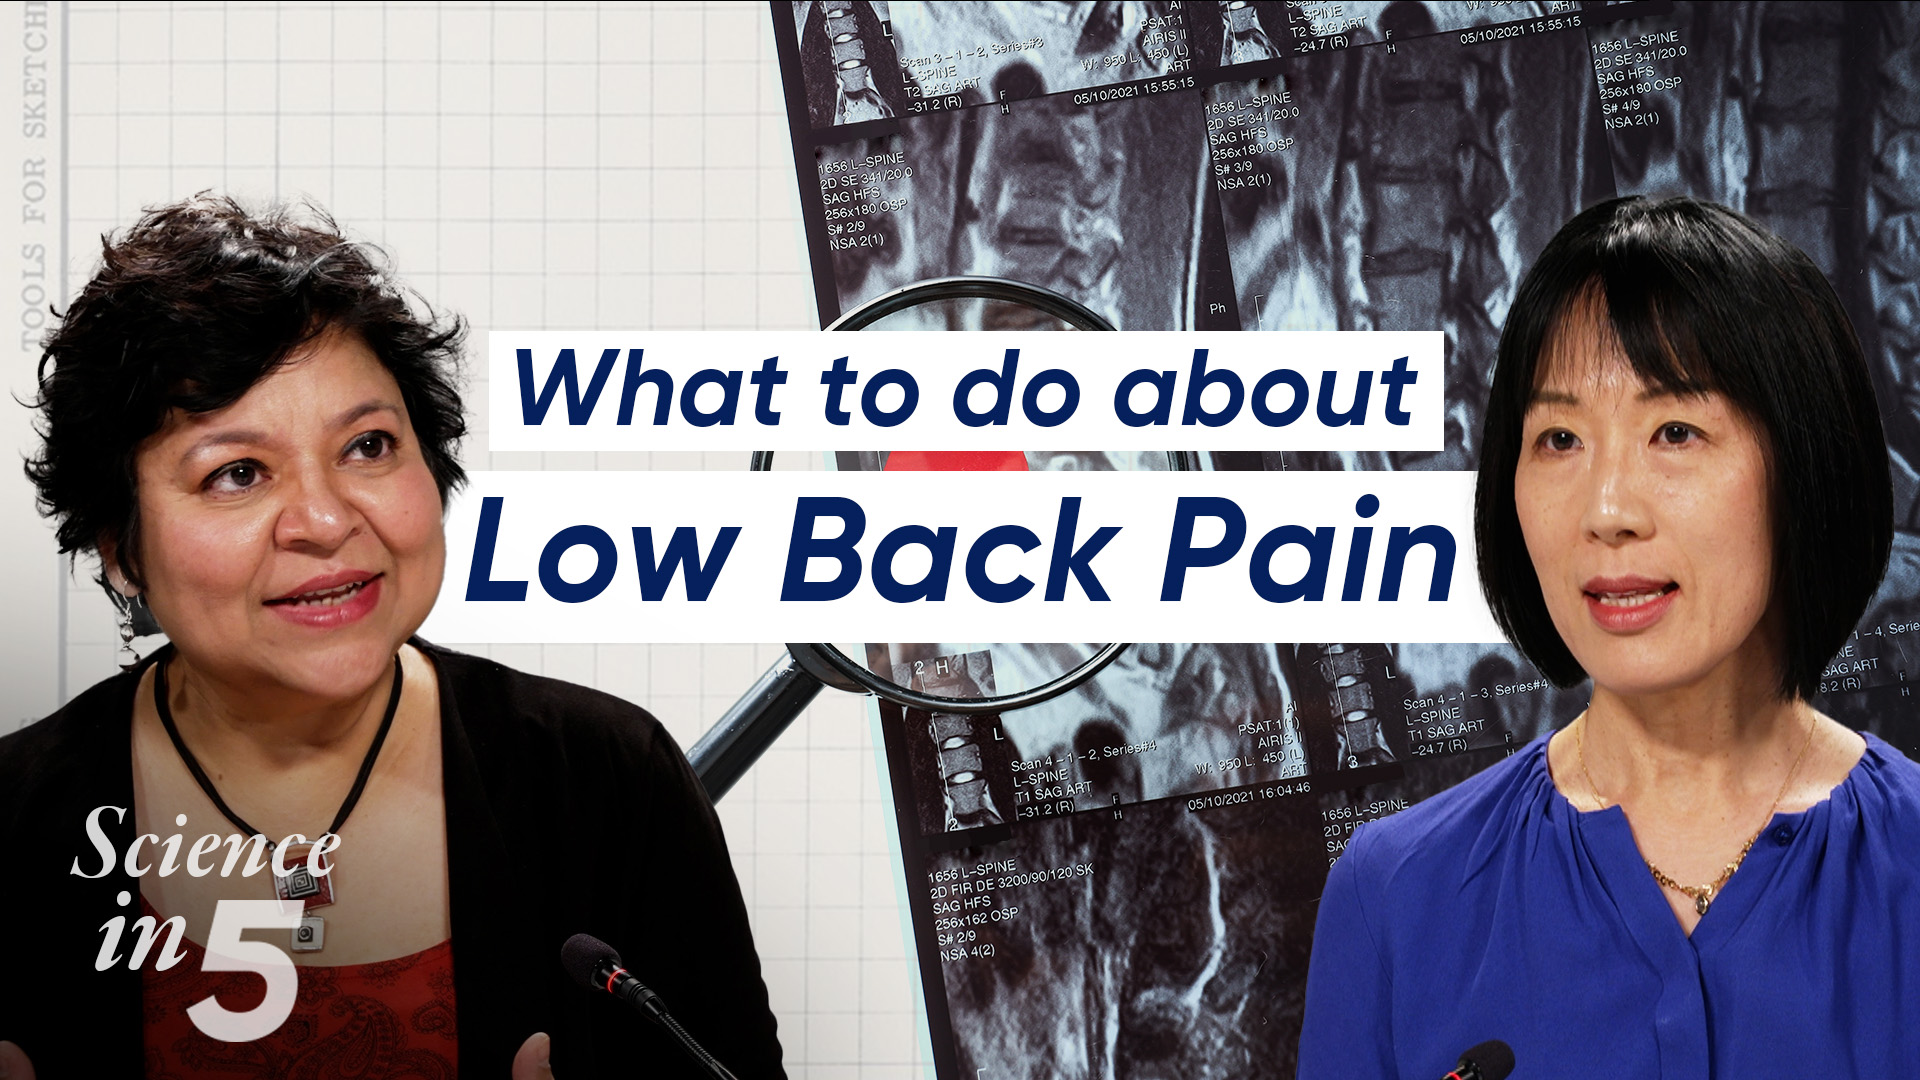 Science in 5 podcast: What to do about low back pain